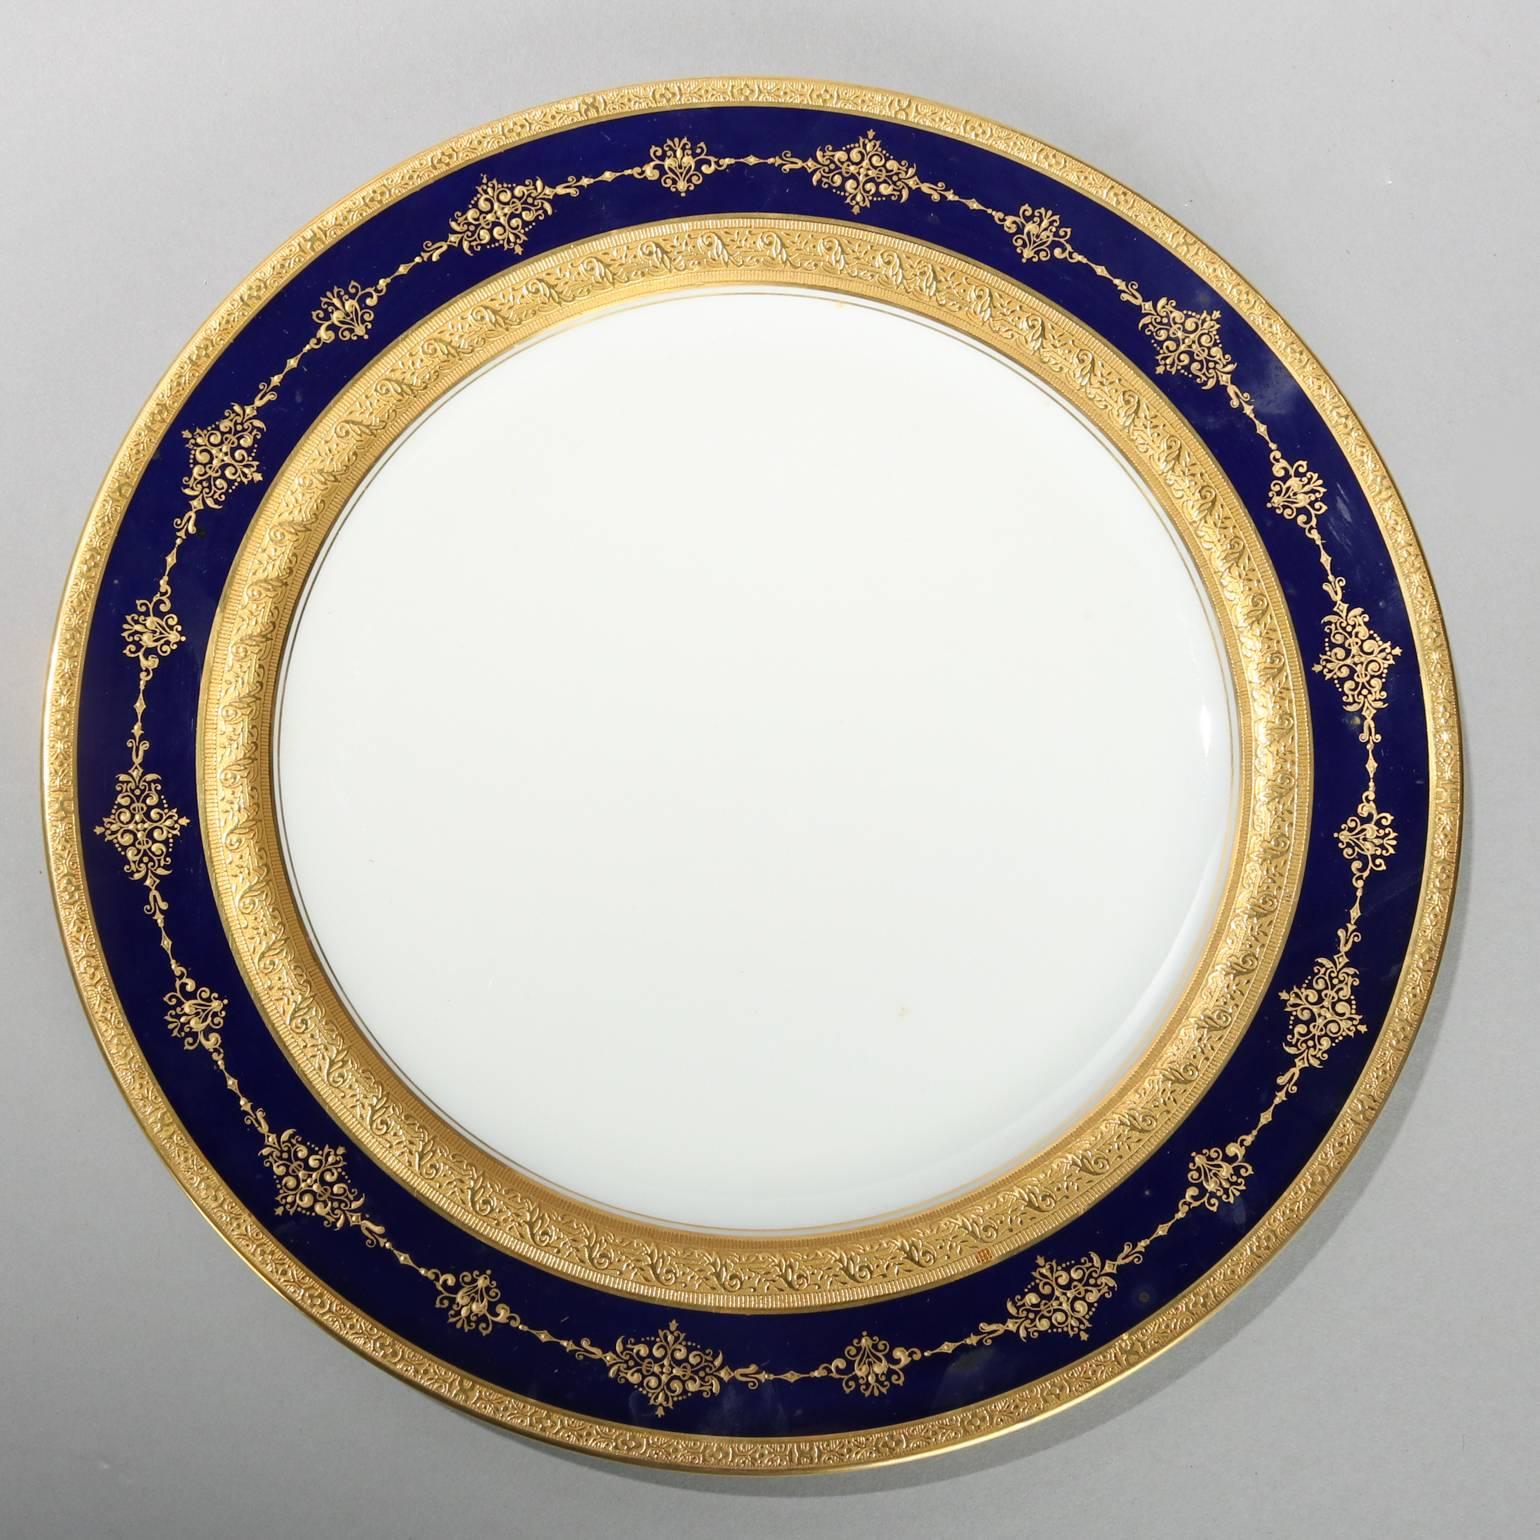 Set of 12 cobalt and gilt dinner plates by Charles Ahrenfeldt Limoges Made Expressly for Ovington's New York and Chicago, 20th century

Measures: 10.25